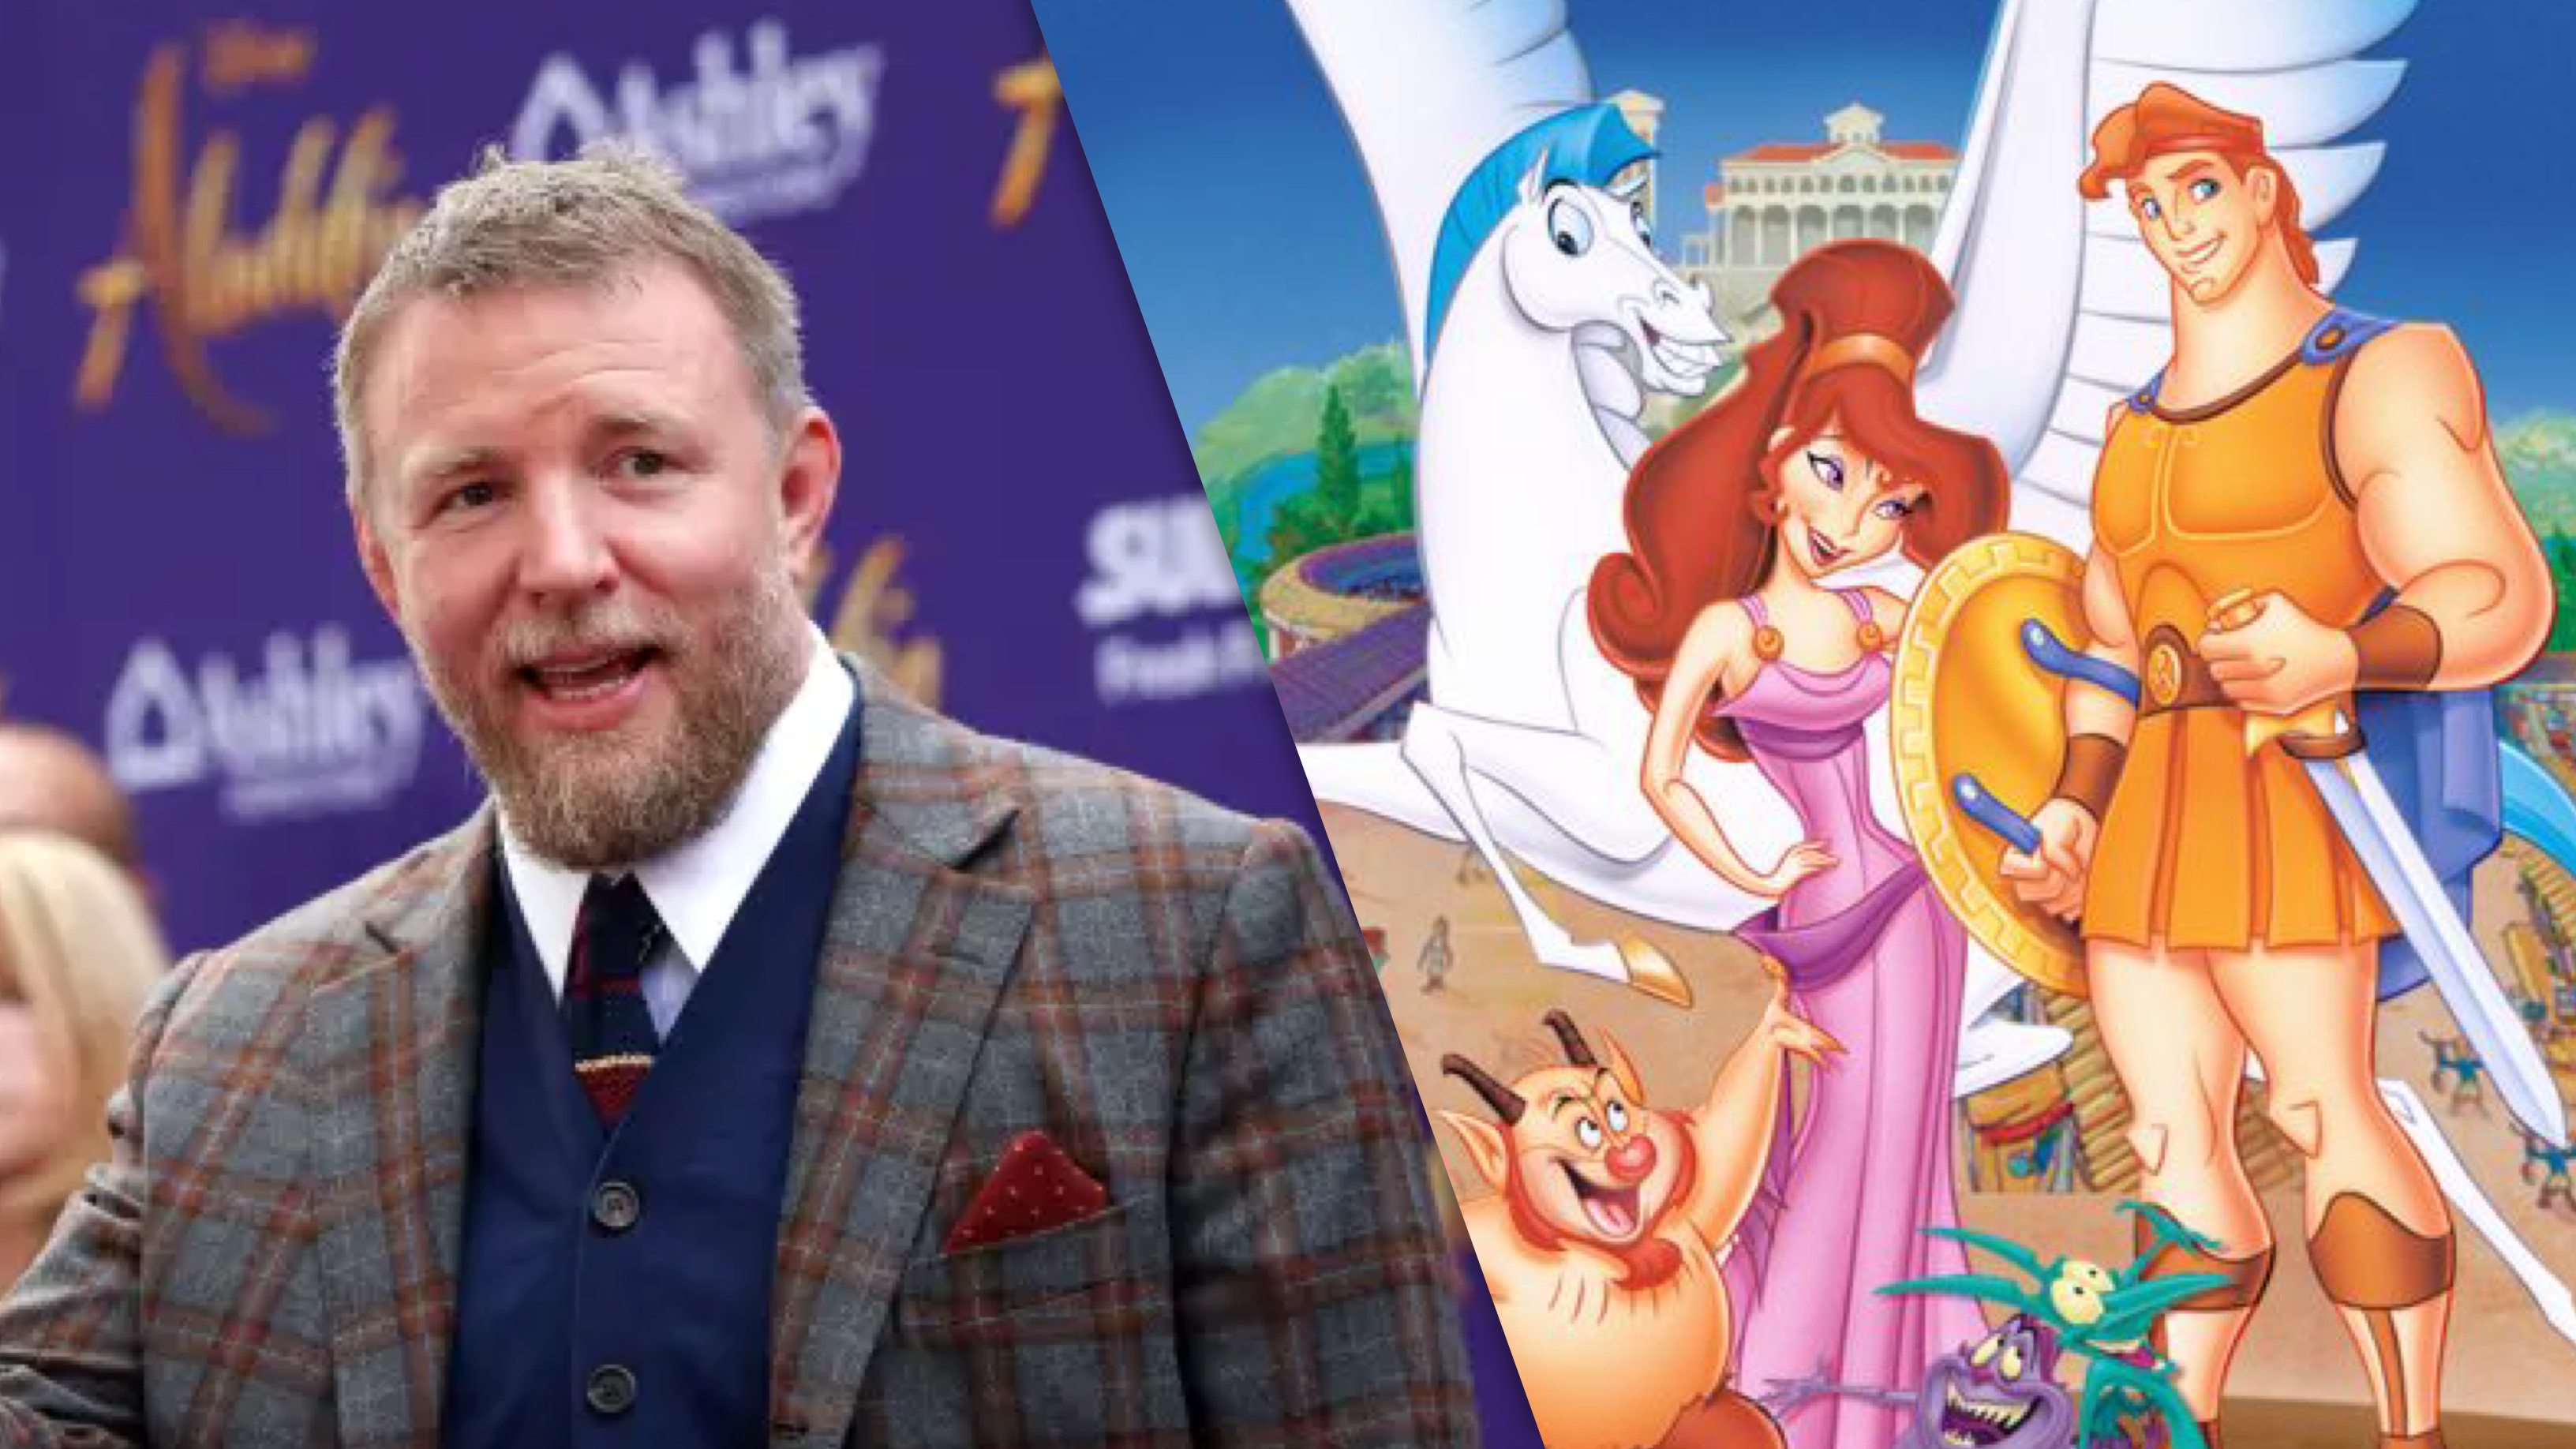 ‘Aladdin’ Director Guy Ritchie to Direct Disney’s Live-Action ‘Hercules’